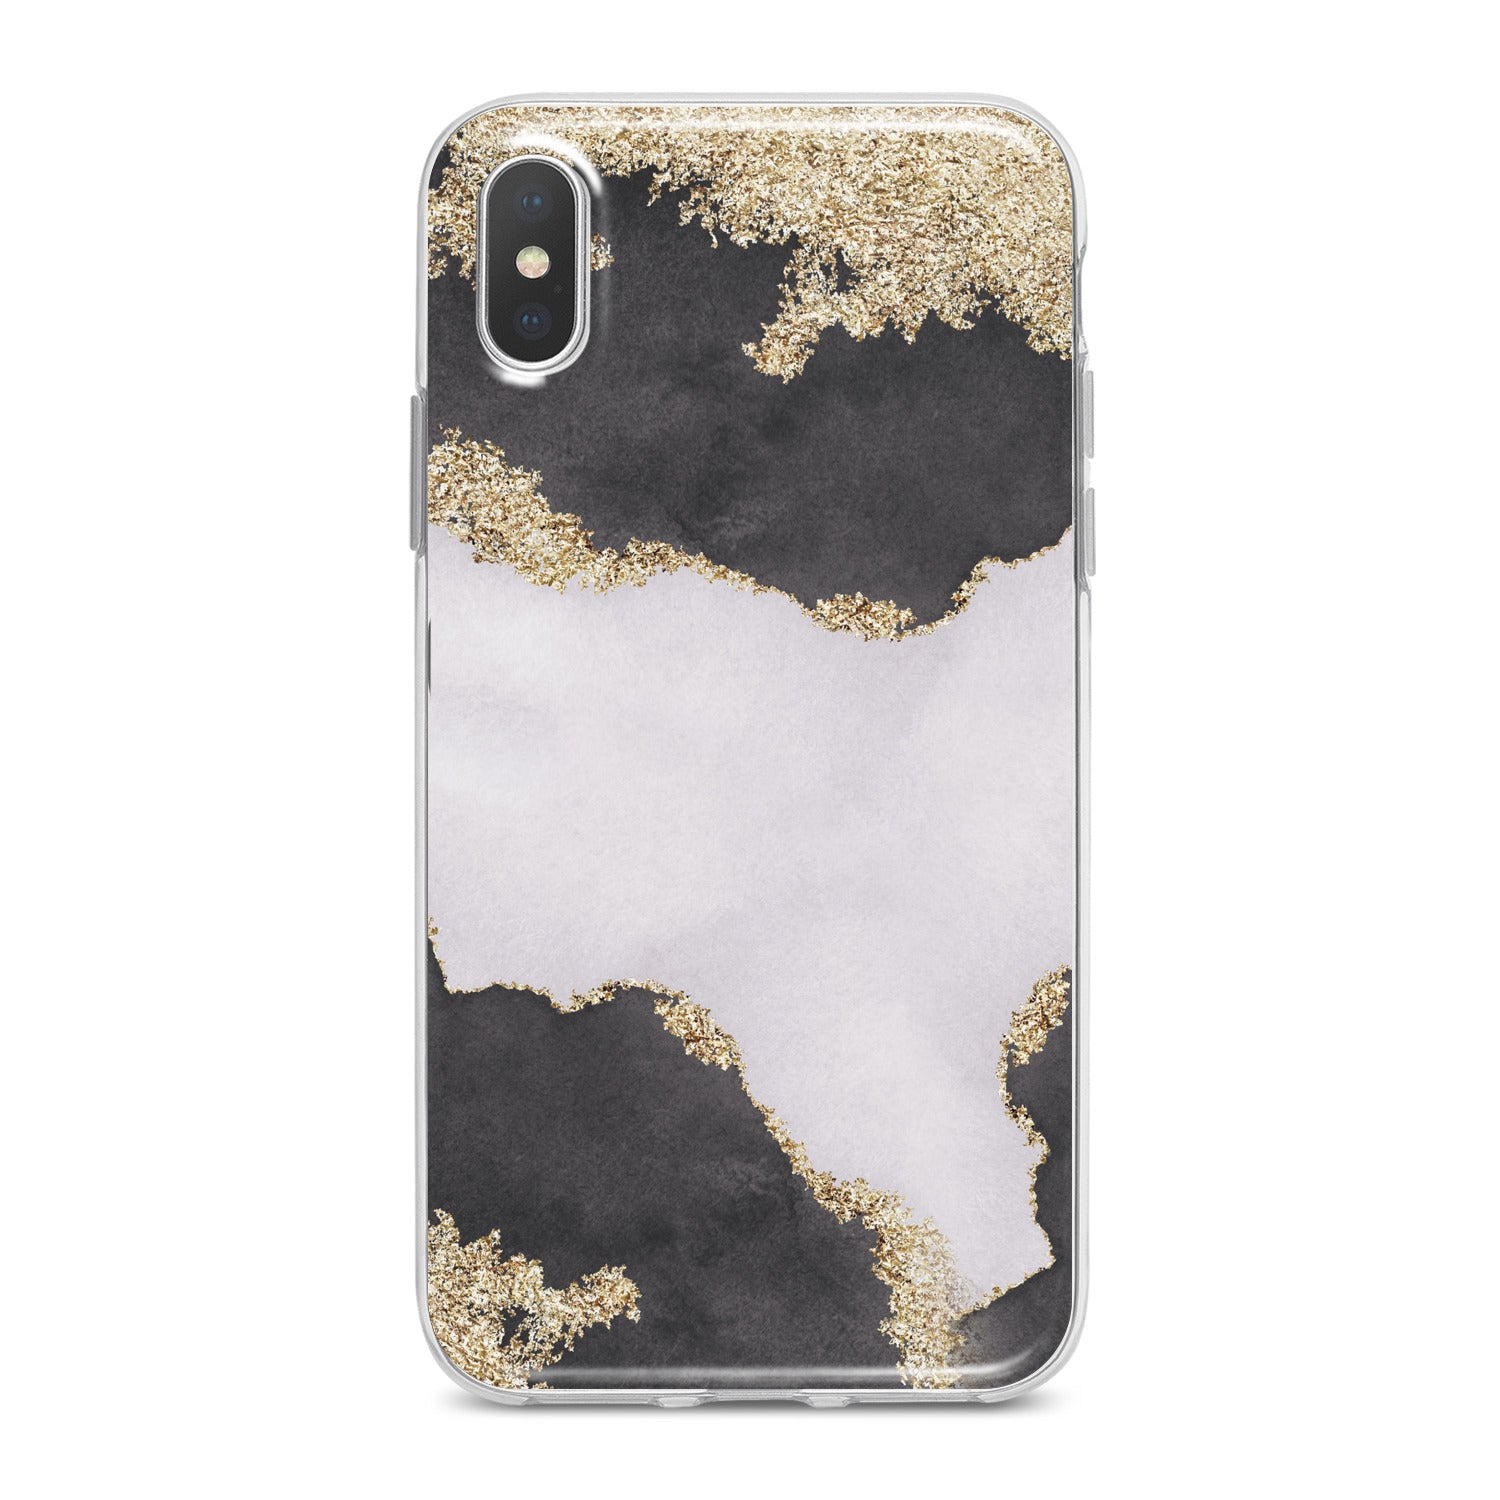 Lex Altern Artistic Artwork Phone Case for your iPhone & Android phone.